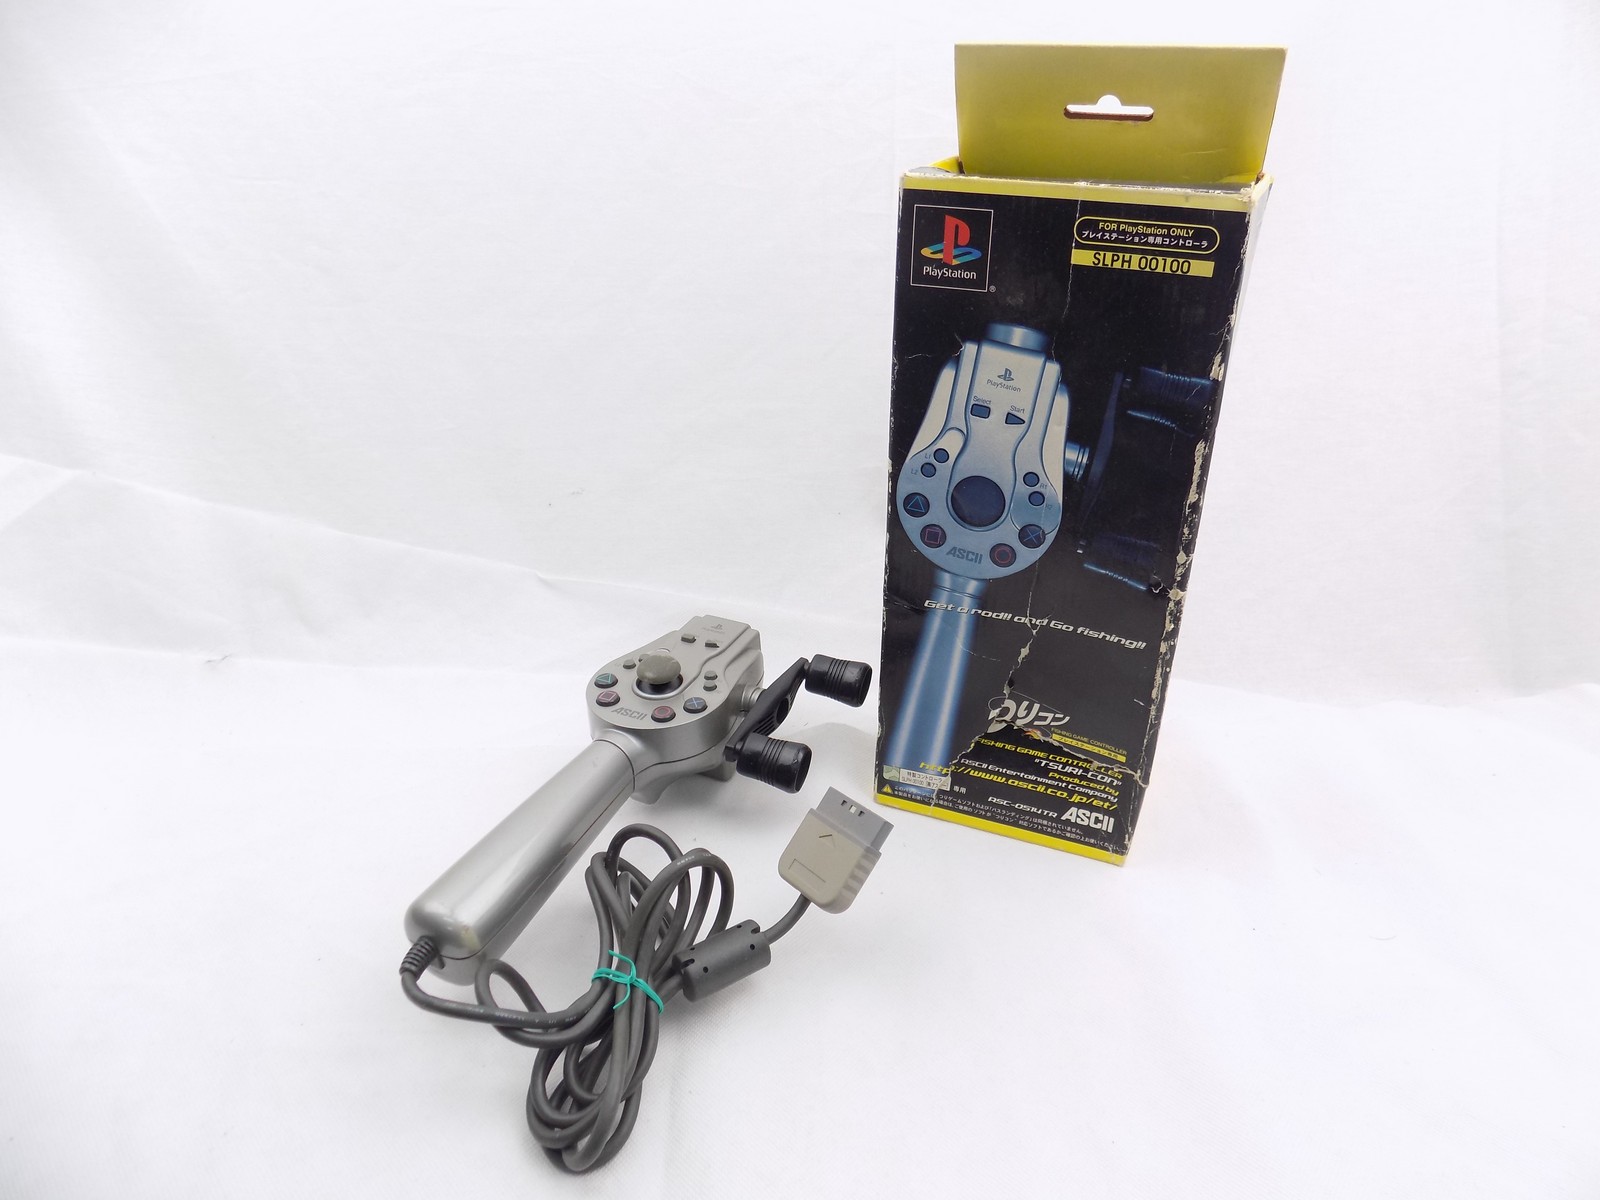 Fishing rod controller for the PS2